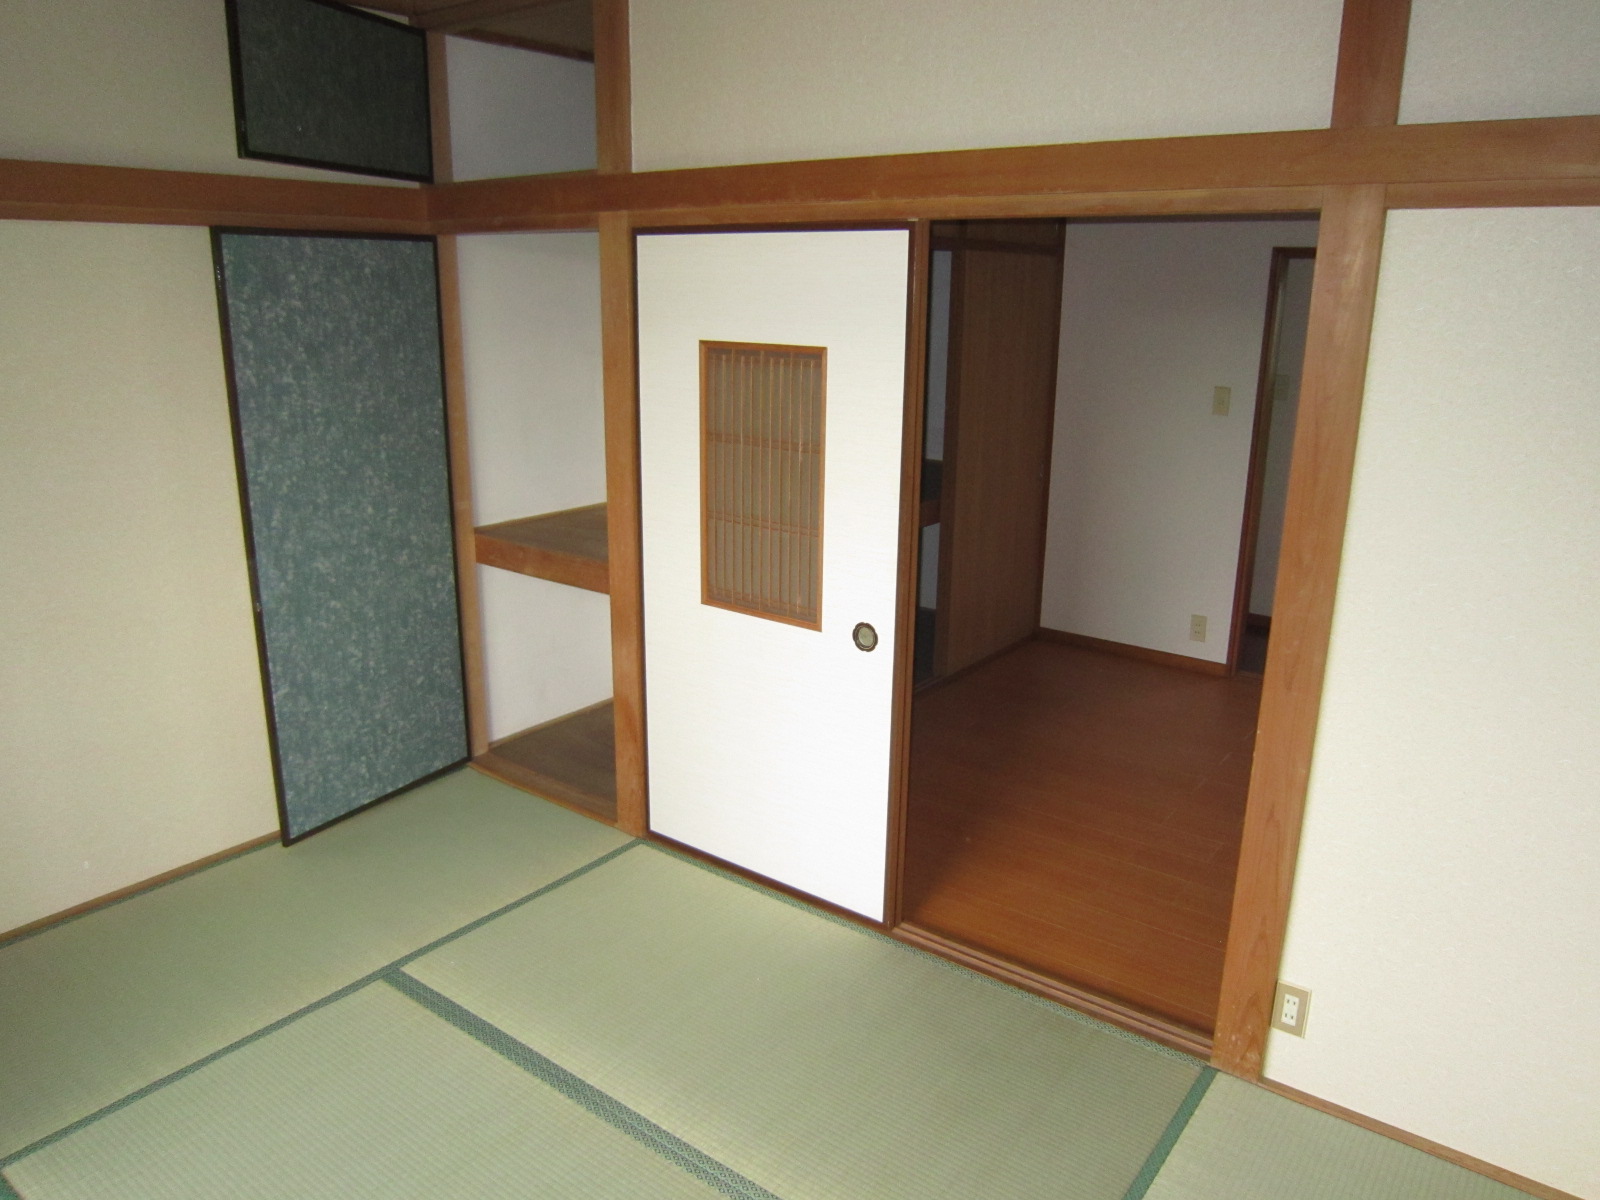 Living and room. Japanese-style room of the storage type closet hammer